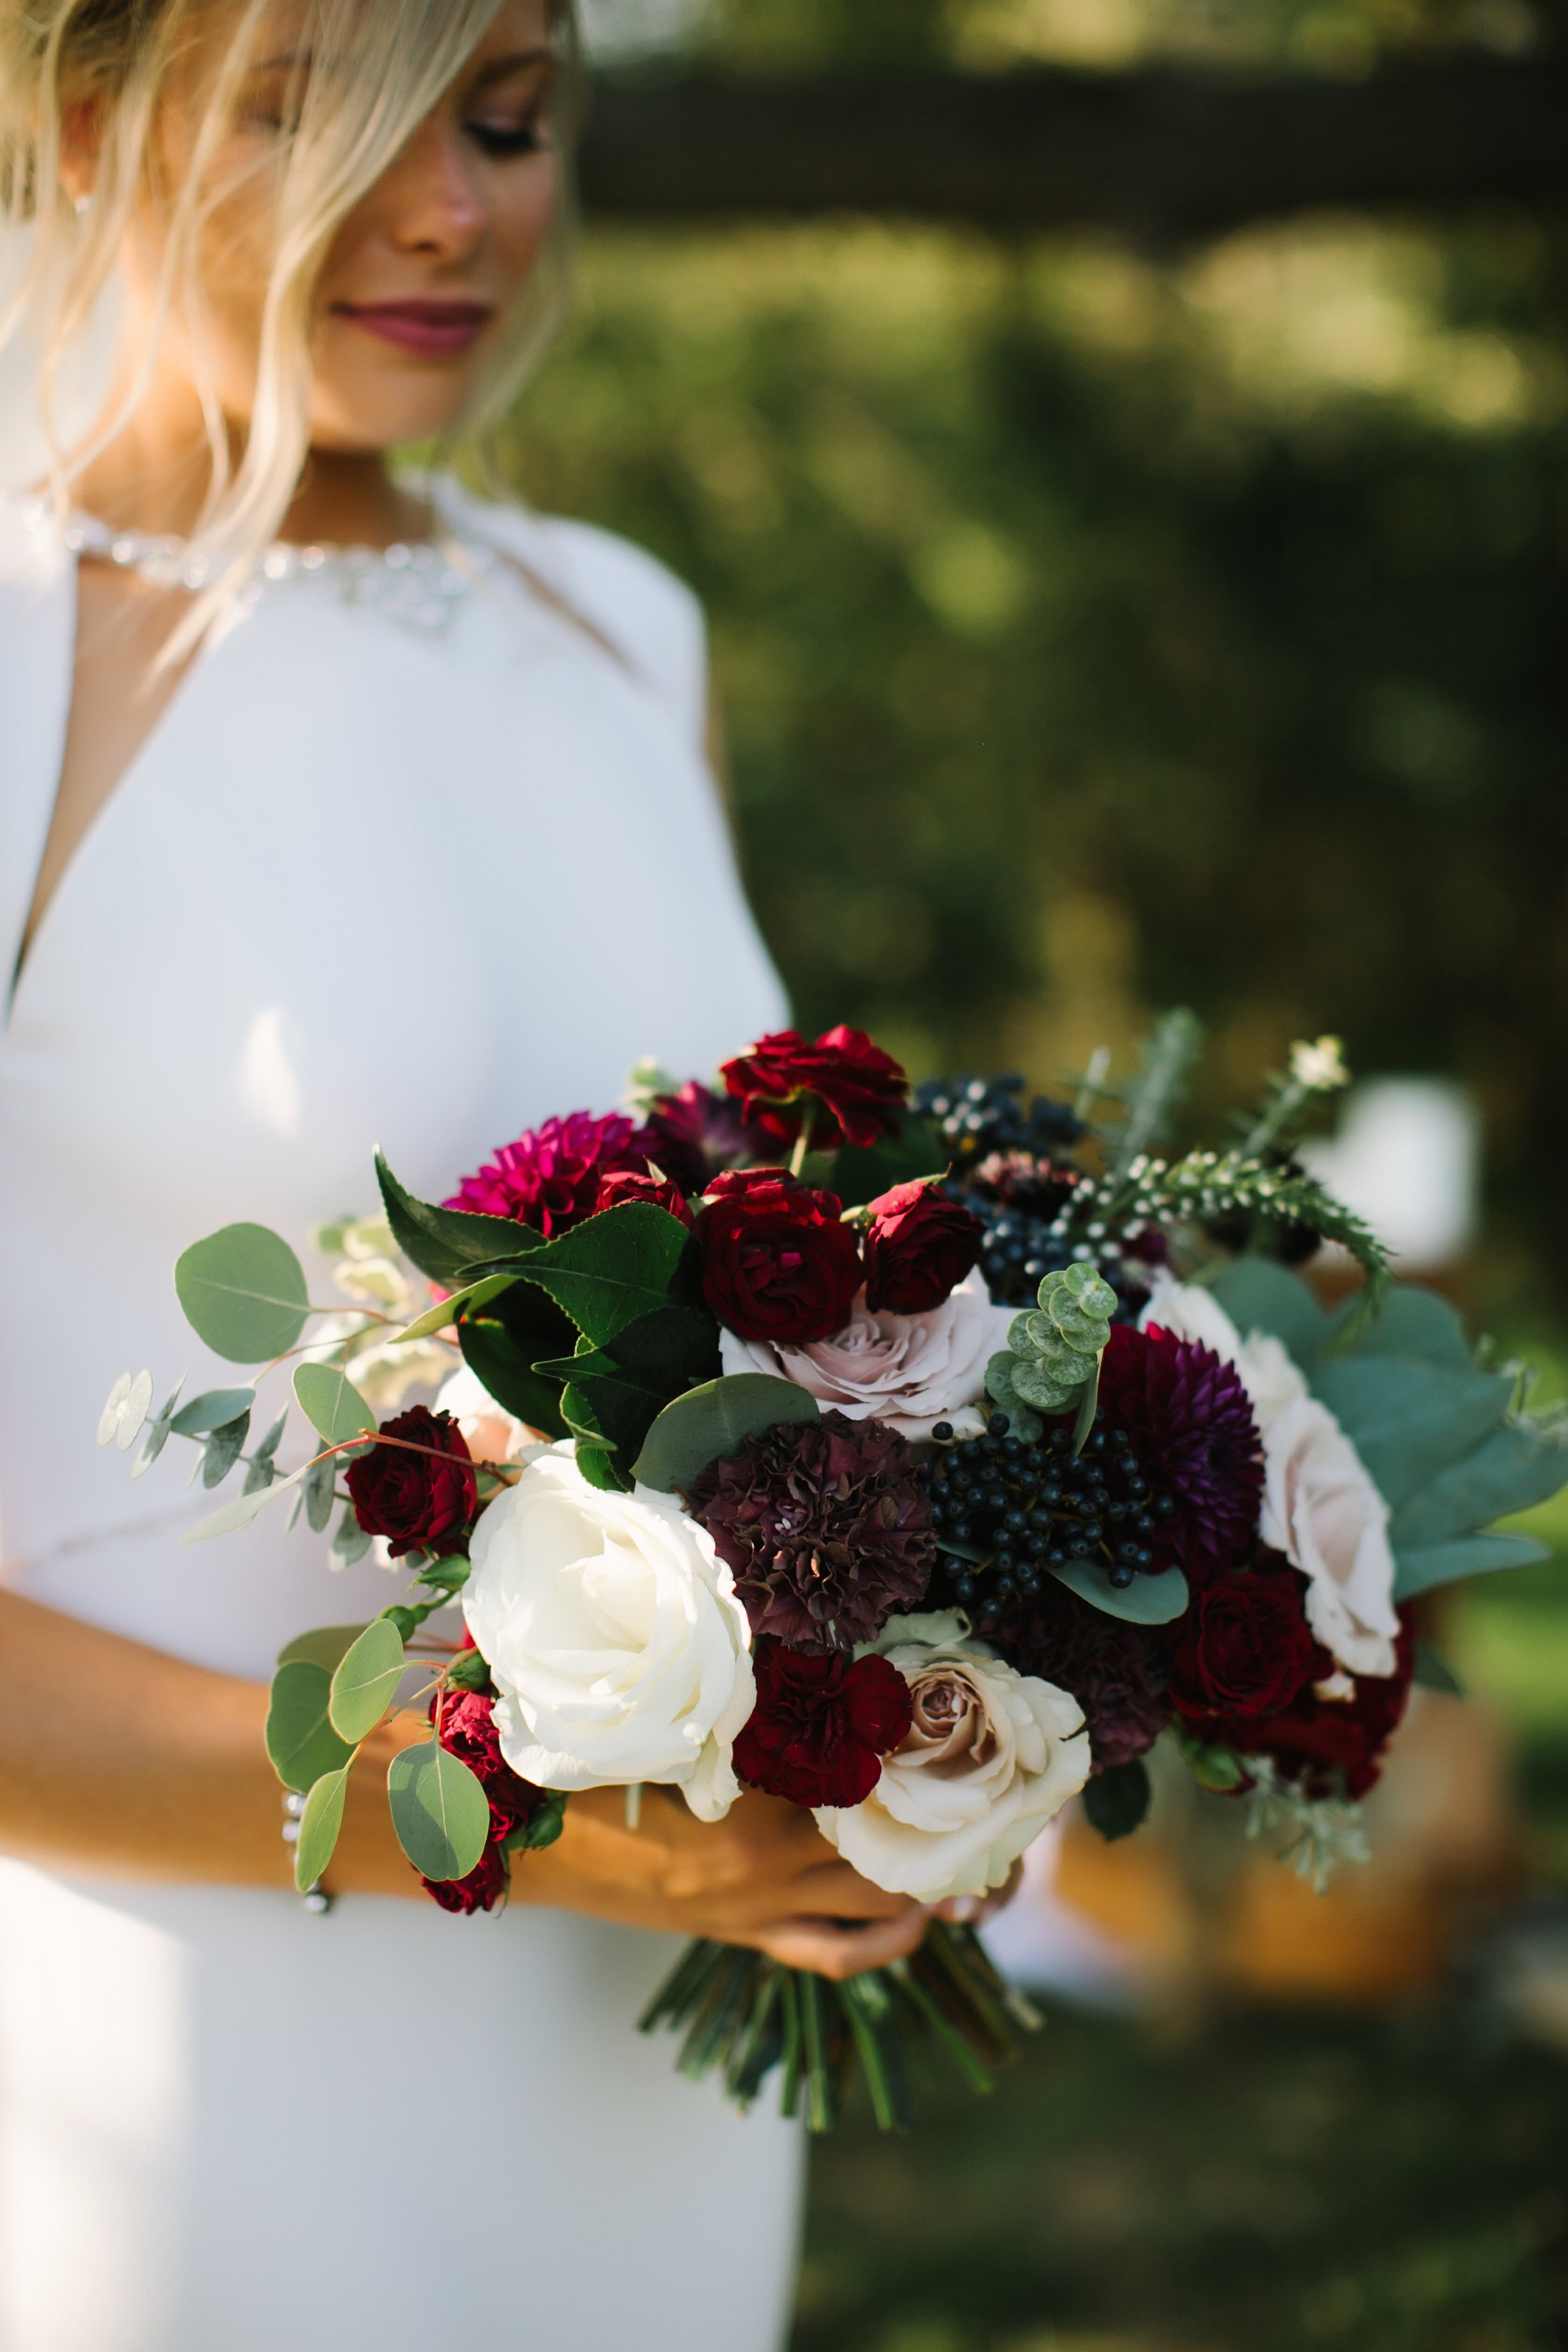 The Valley wedding flowers